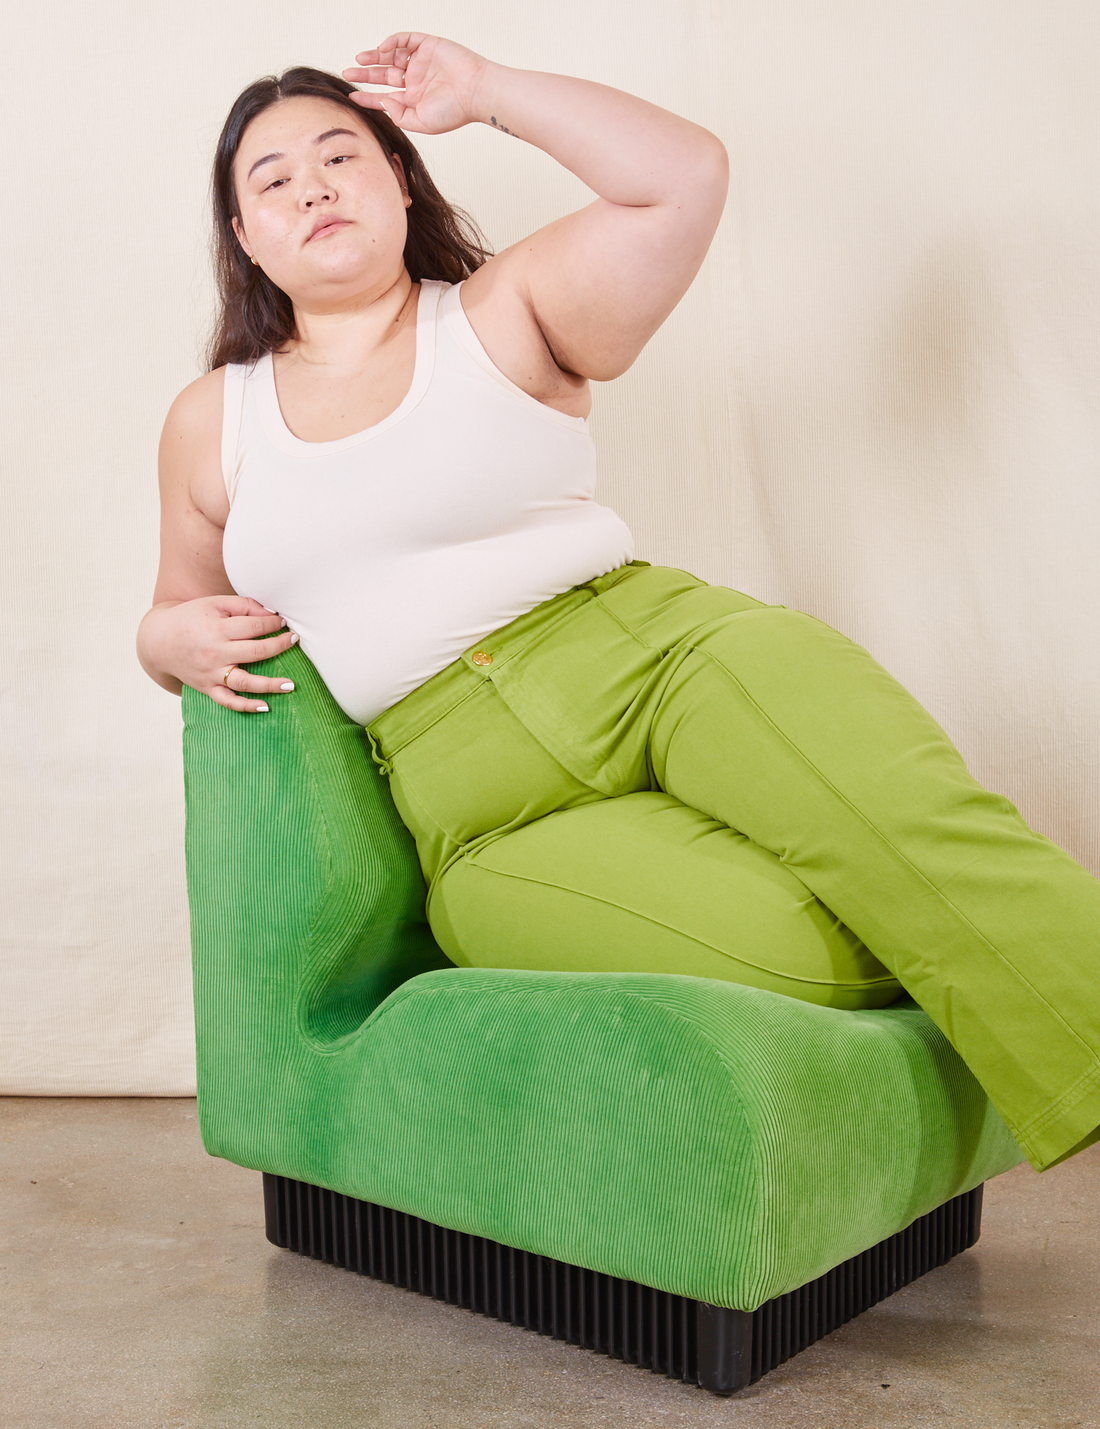 Ashley is sitting on a green upholstered chair wearing Western Pants in Gross Green paired with a vintage off-white Tank Top